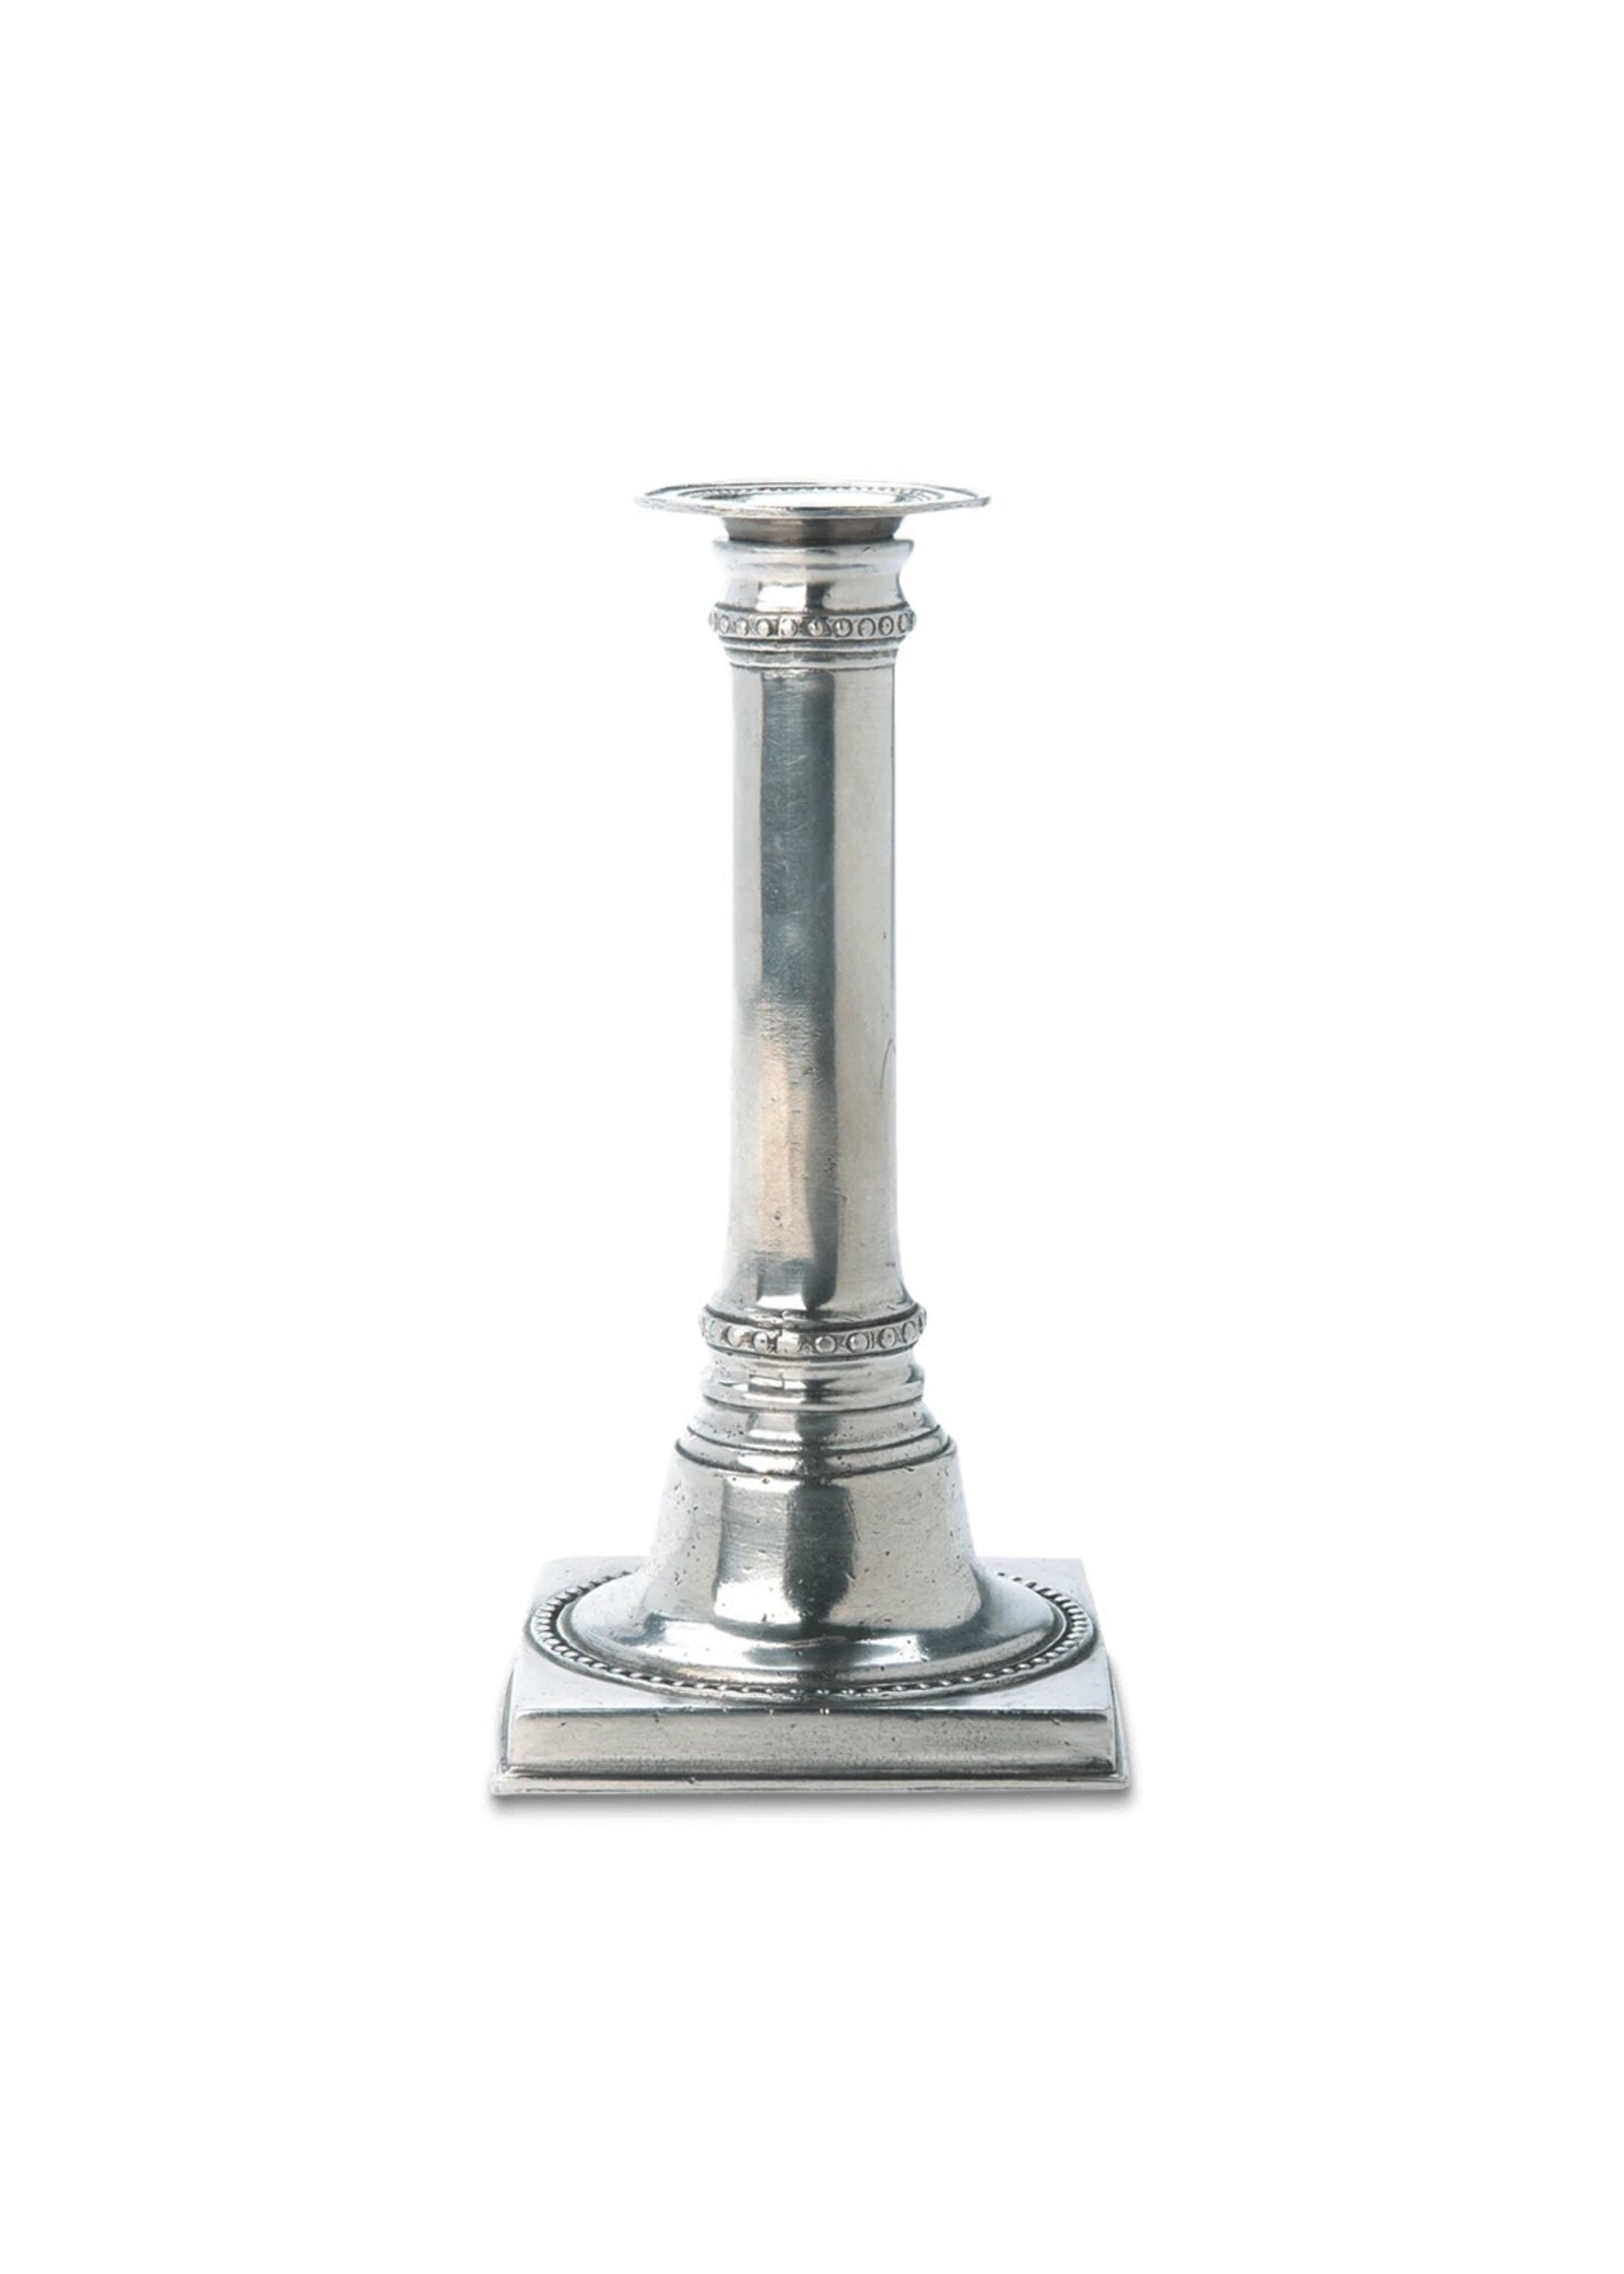 Match Pewter Candlestick - Pewter Square